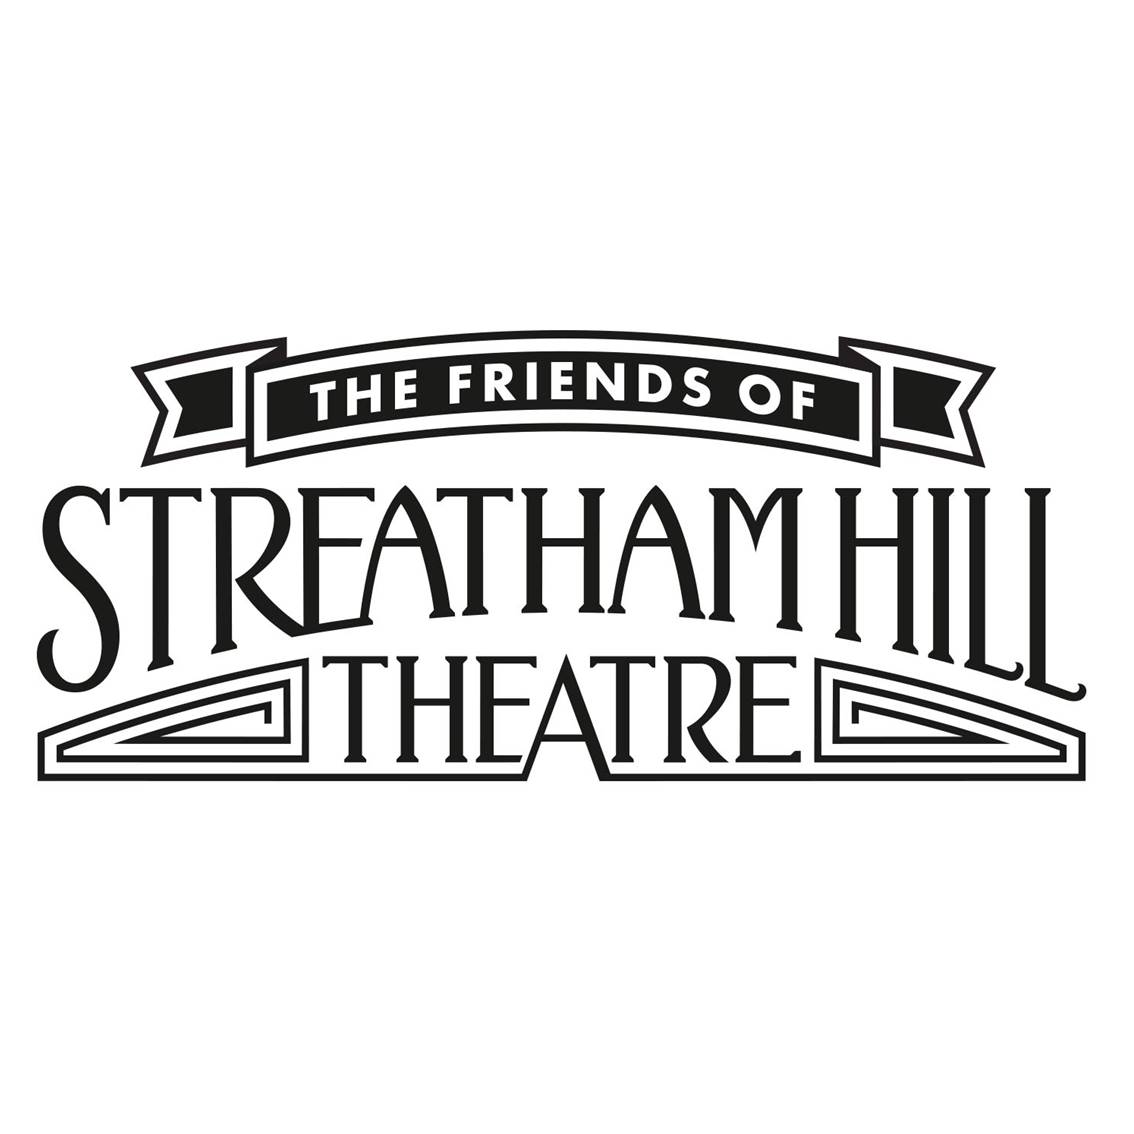 The Friends of Streatham Hill Theatre logo